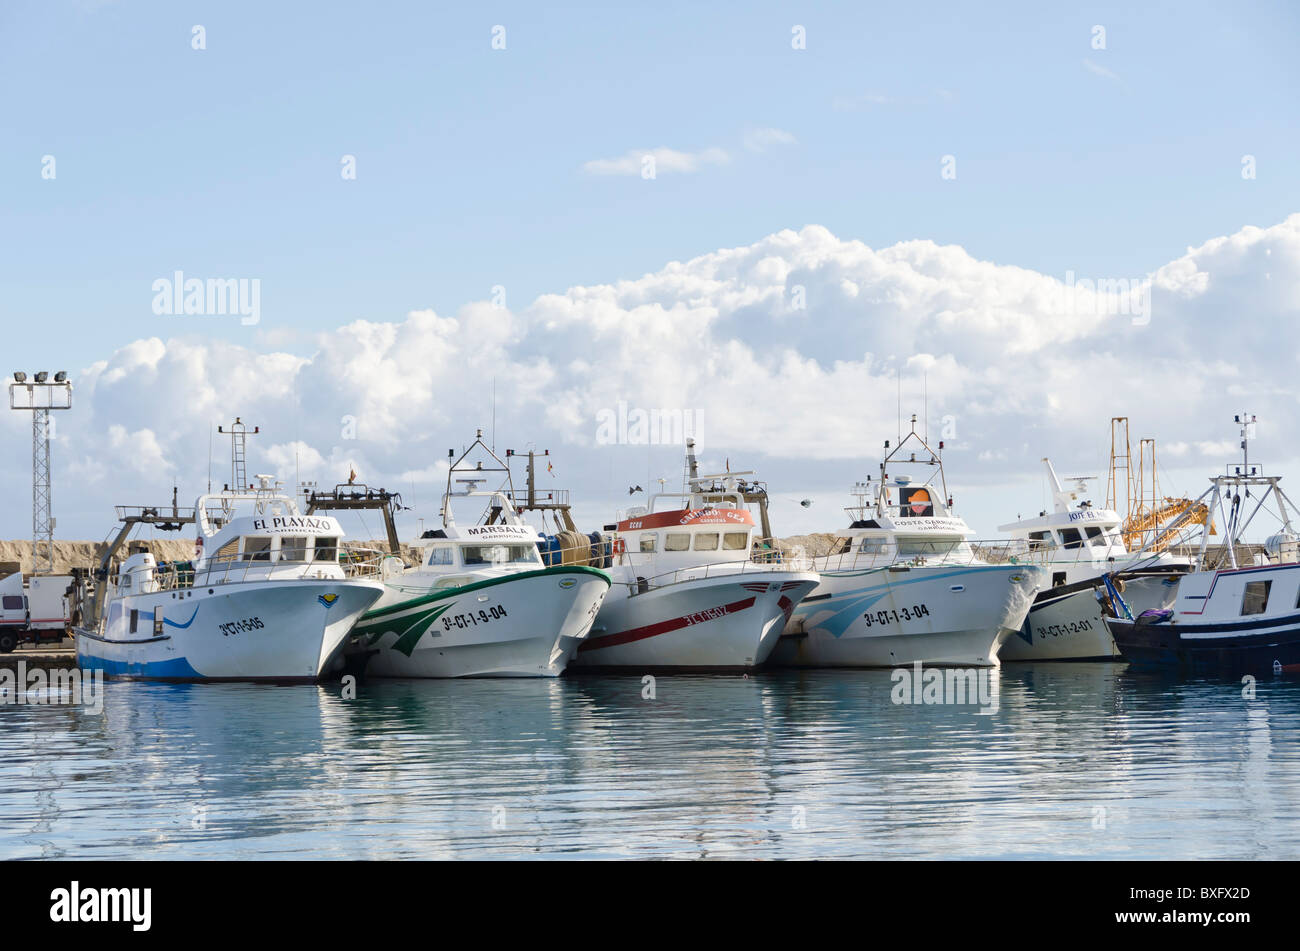 Fishing Boats in Garrucha harbour, Spain on a Sunday lunchtime. The Fishing Boats are lined up in the harbour ready for their next outing. Stock Photo